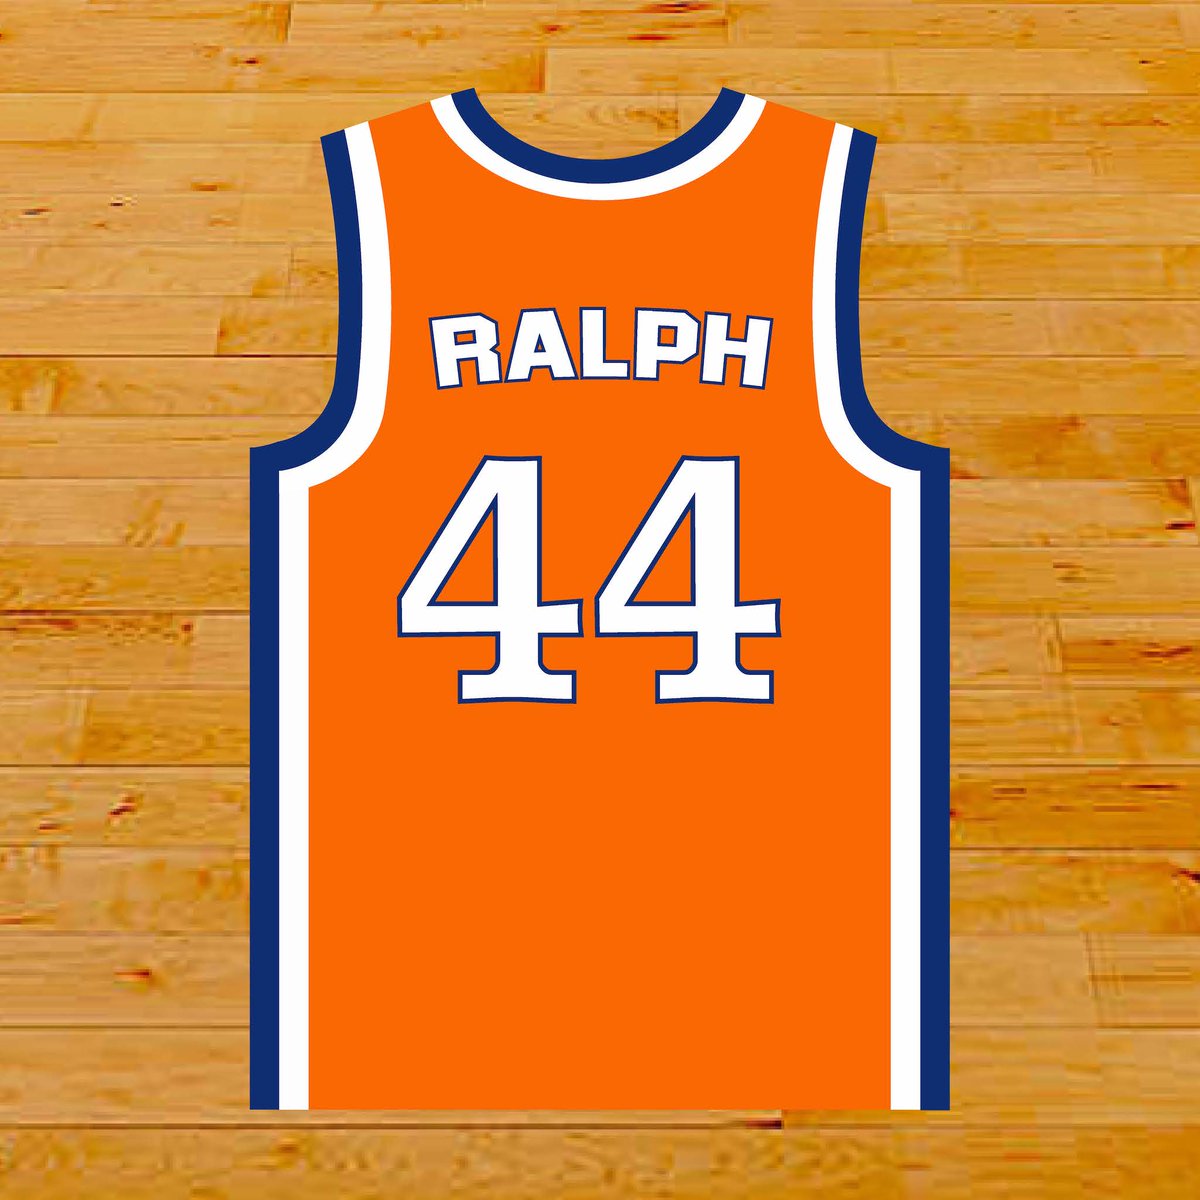 In celebration of my 44th birthday today, here is my personal basketball jersey design that pays tribute to the famous number 44 worn by the Syracuse great, Derrick Coleman, and other great players in Syracuse history.

#graphicdesign #jerseydesign #graphicdesigner 
@Cuse_MBB https://t.co/0Gxah0OZDo